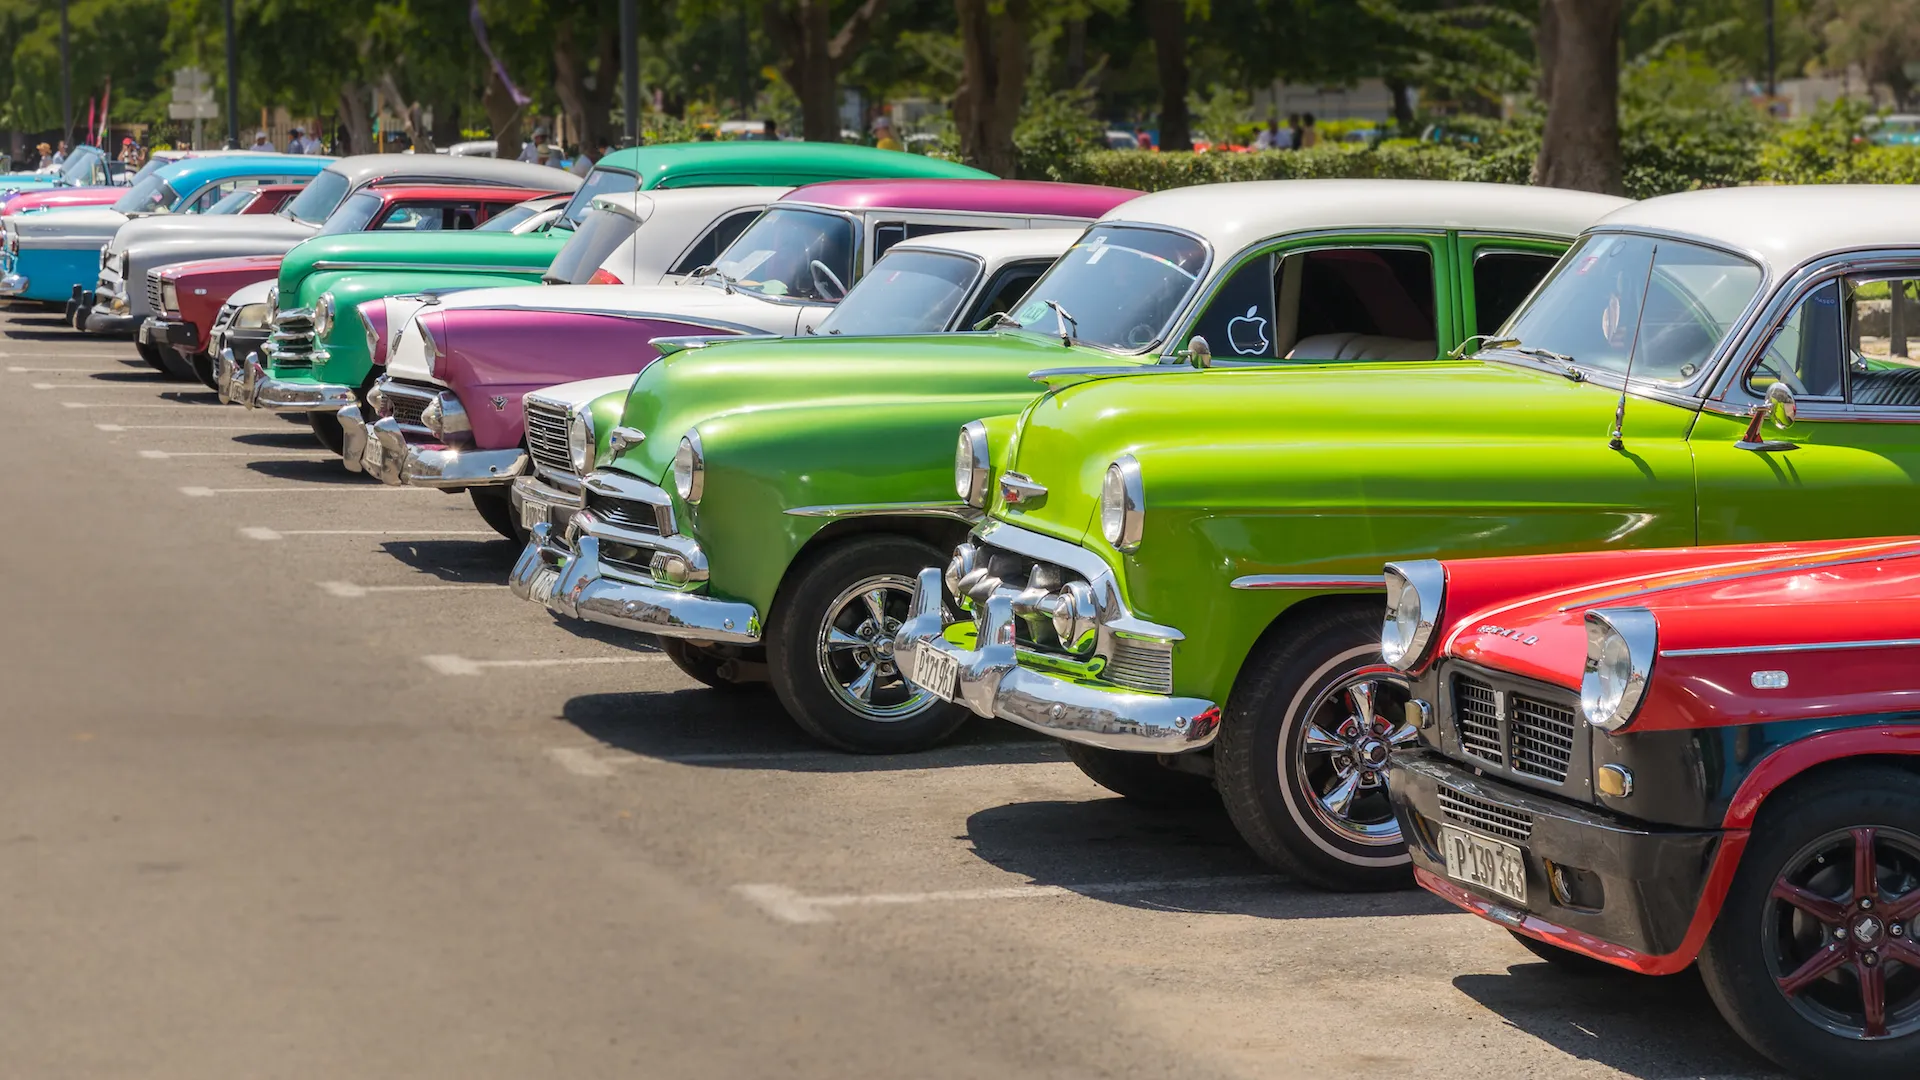 Havana, Cuba - July 23, 2018; A row of typical colorful Cuban oldtimer classic cars standing in line during day time on a parking lot.